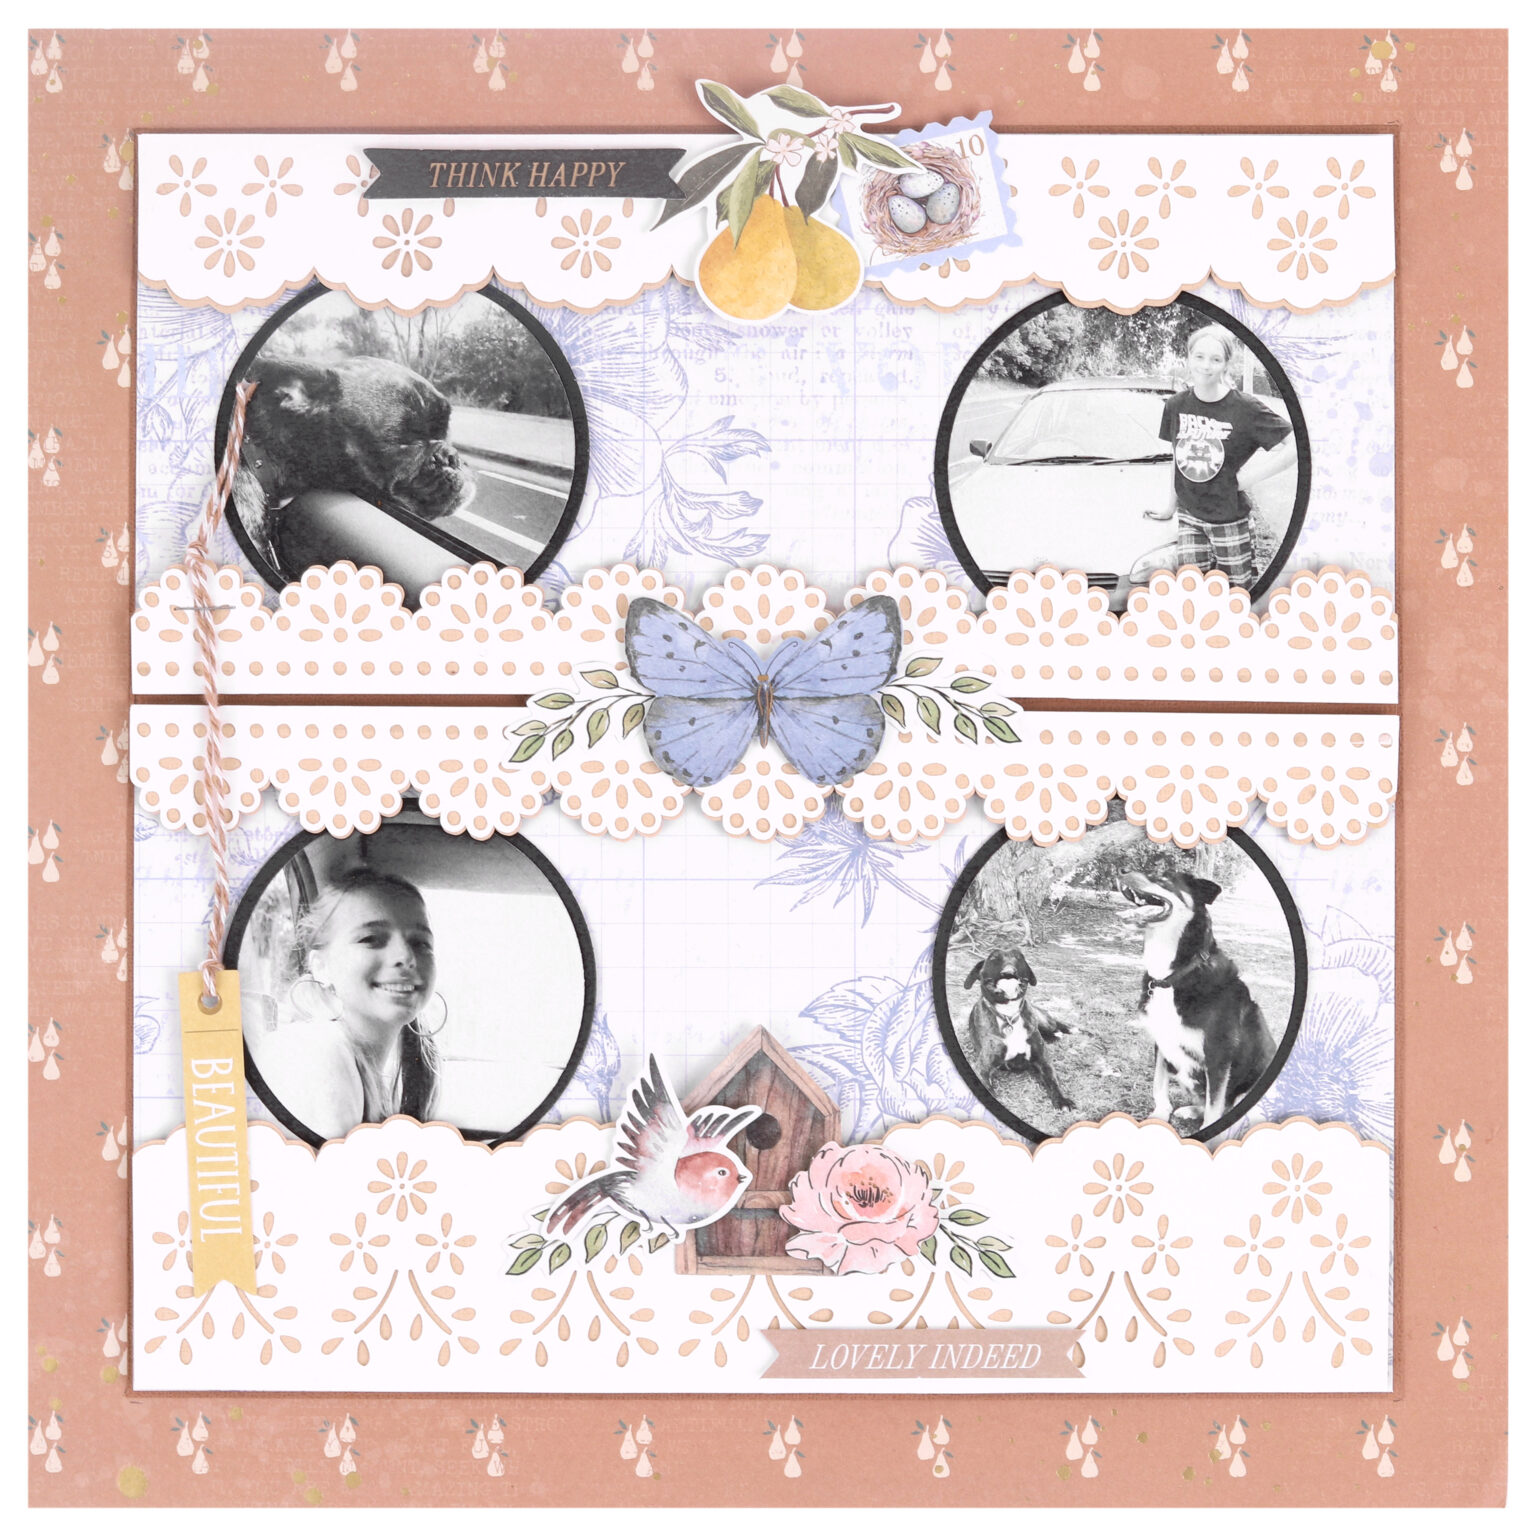 Wildwood 12x12 scrapbook layout using a brodierie anglaise lace cut file.